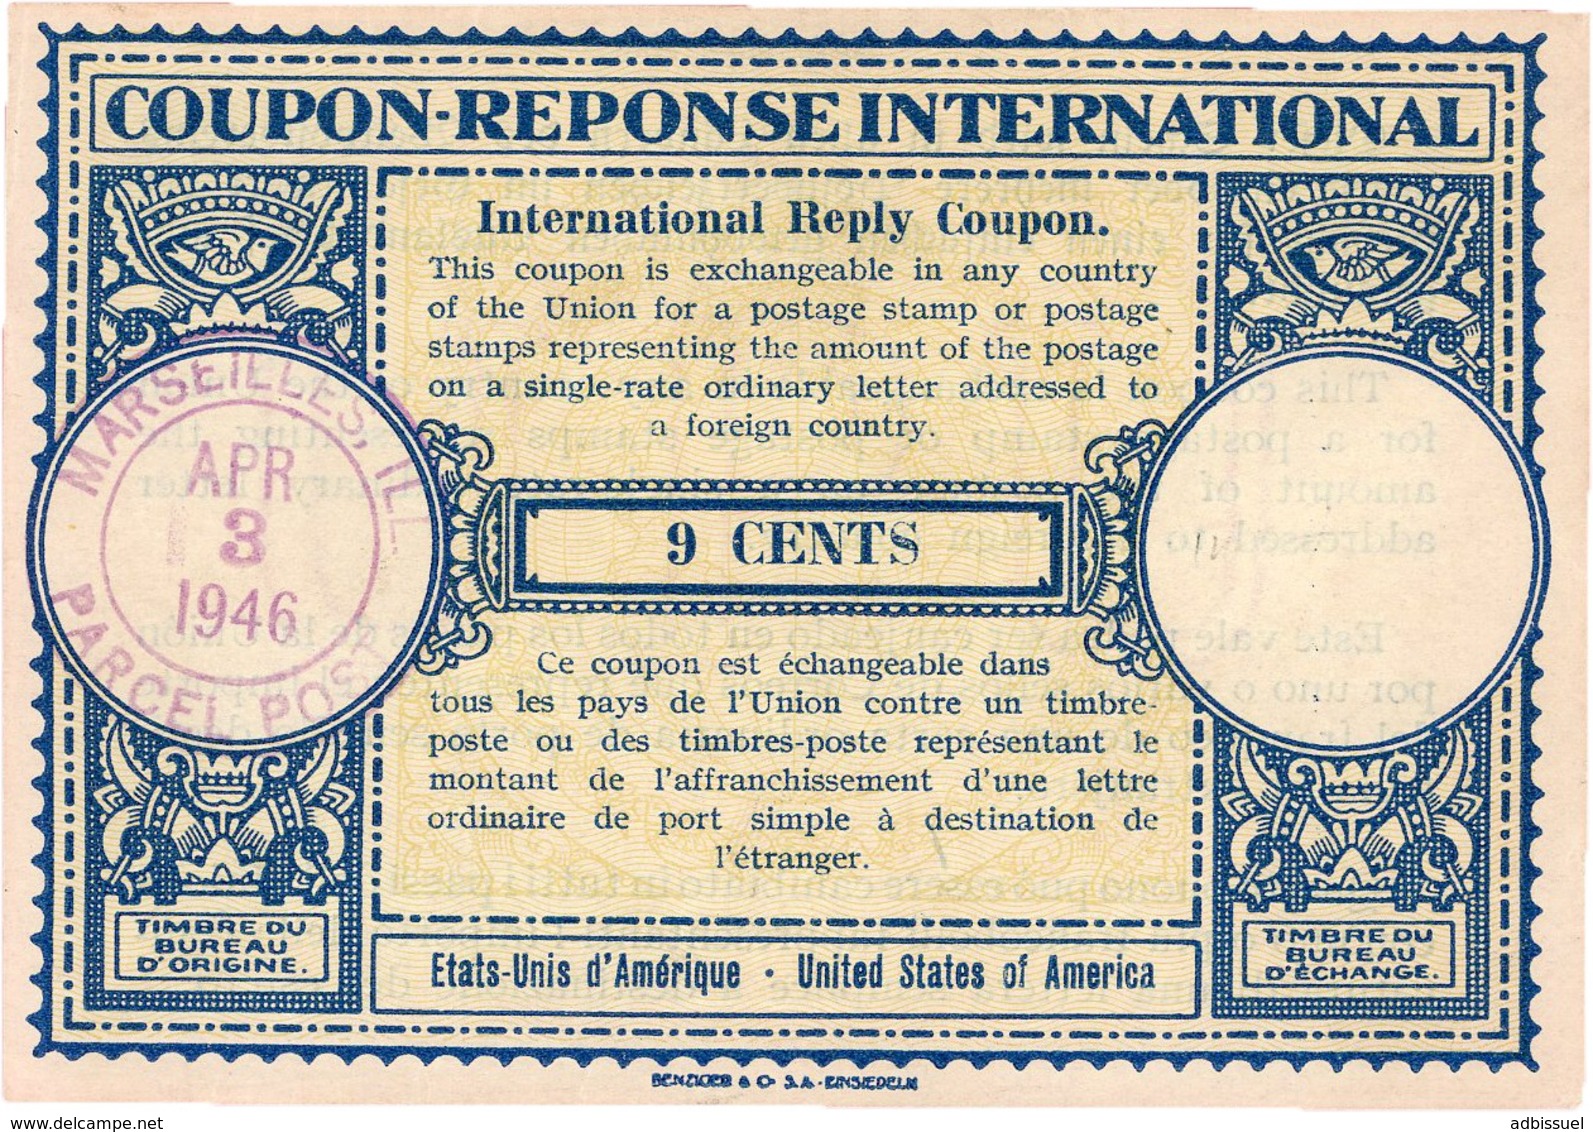 COUPON-REPONSE INTERNATIONAL USA Type Londres Obliteration Lilas "MARSEILLES ILL. PARCEL POST 3/4/46" / 9 Cents. TB - Reply Coupons